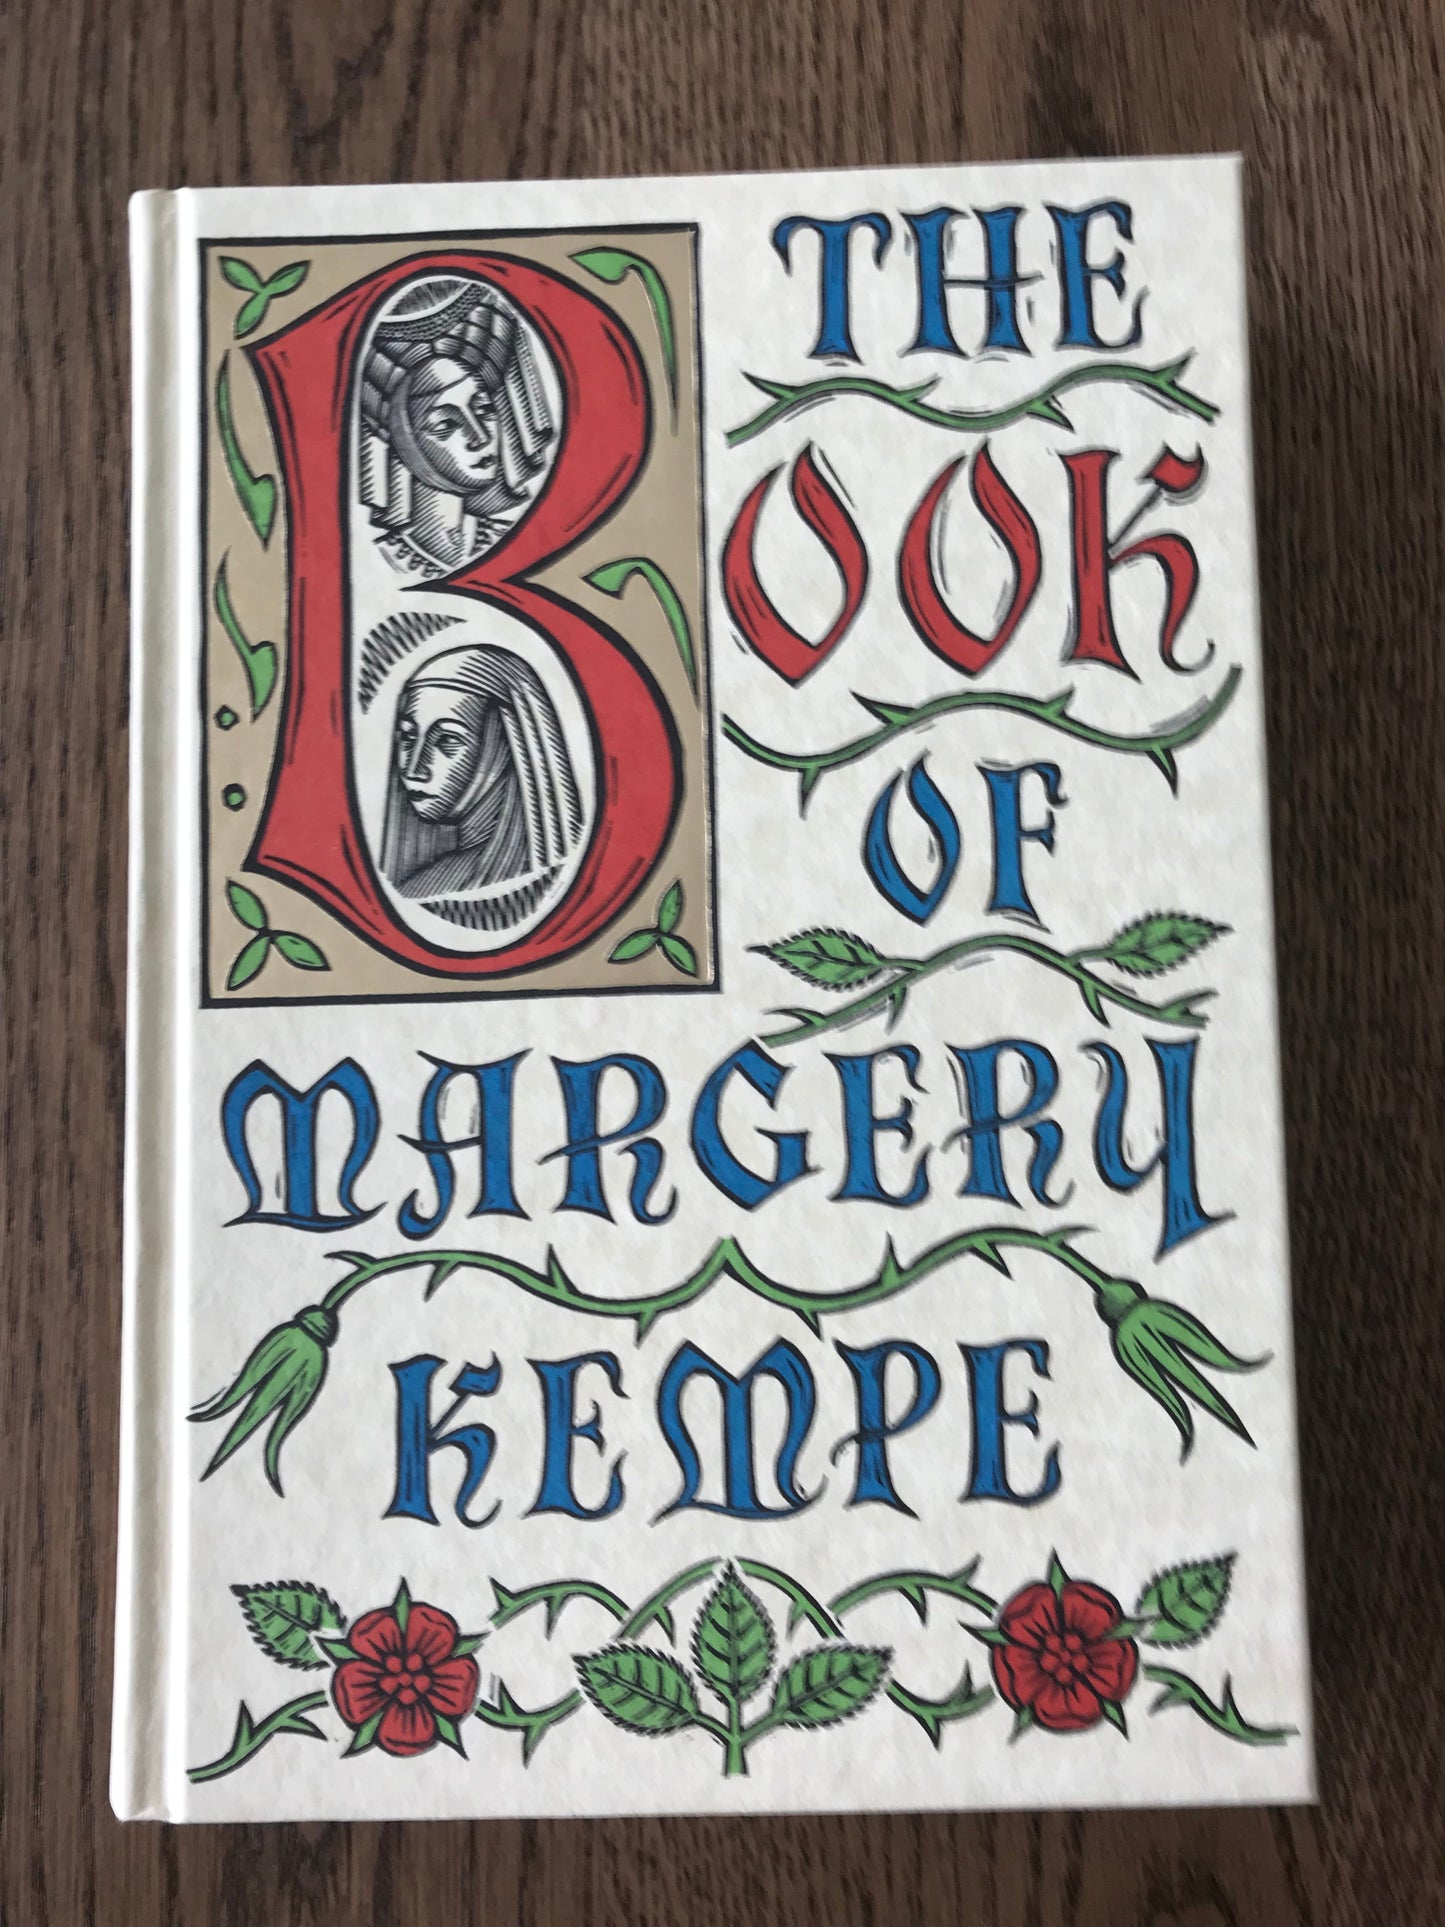 THE BOOK OF MARJORY KEMPE - BY B.A. WINDEATT BooksCardsNBikes